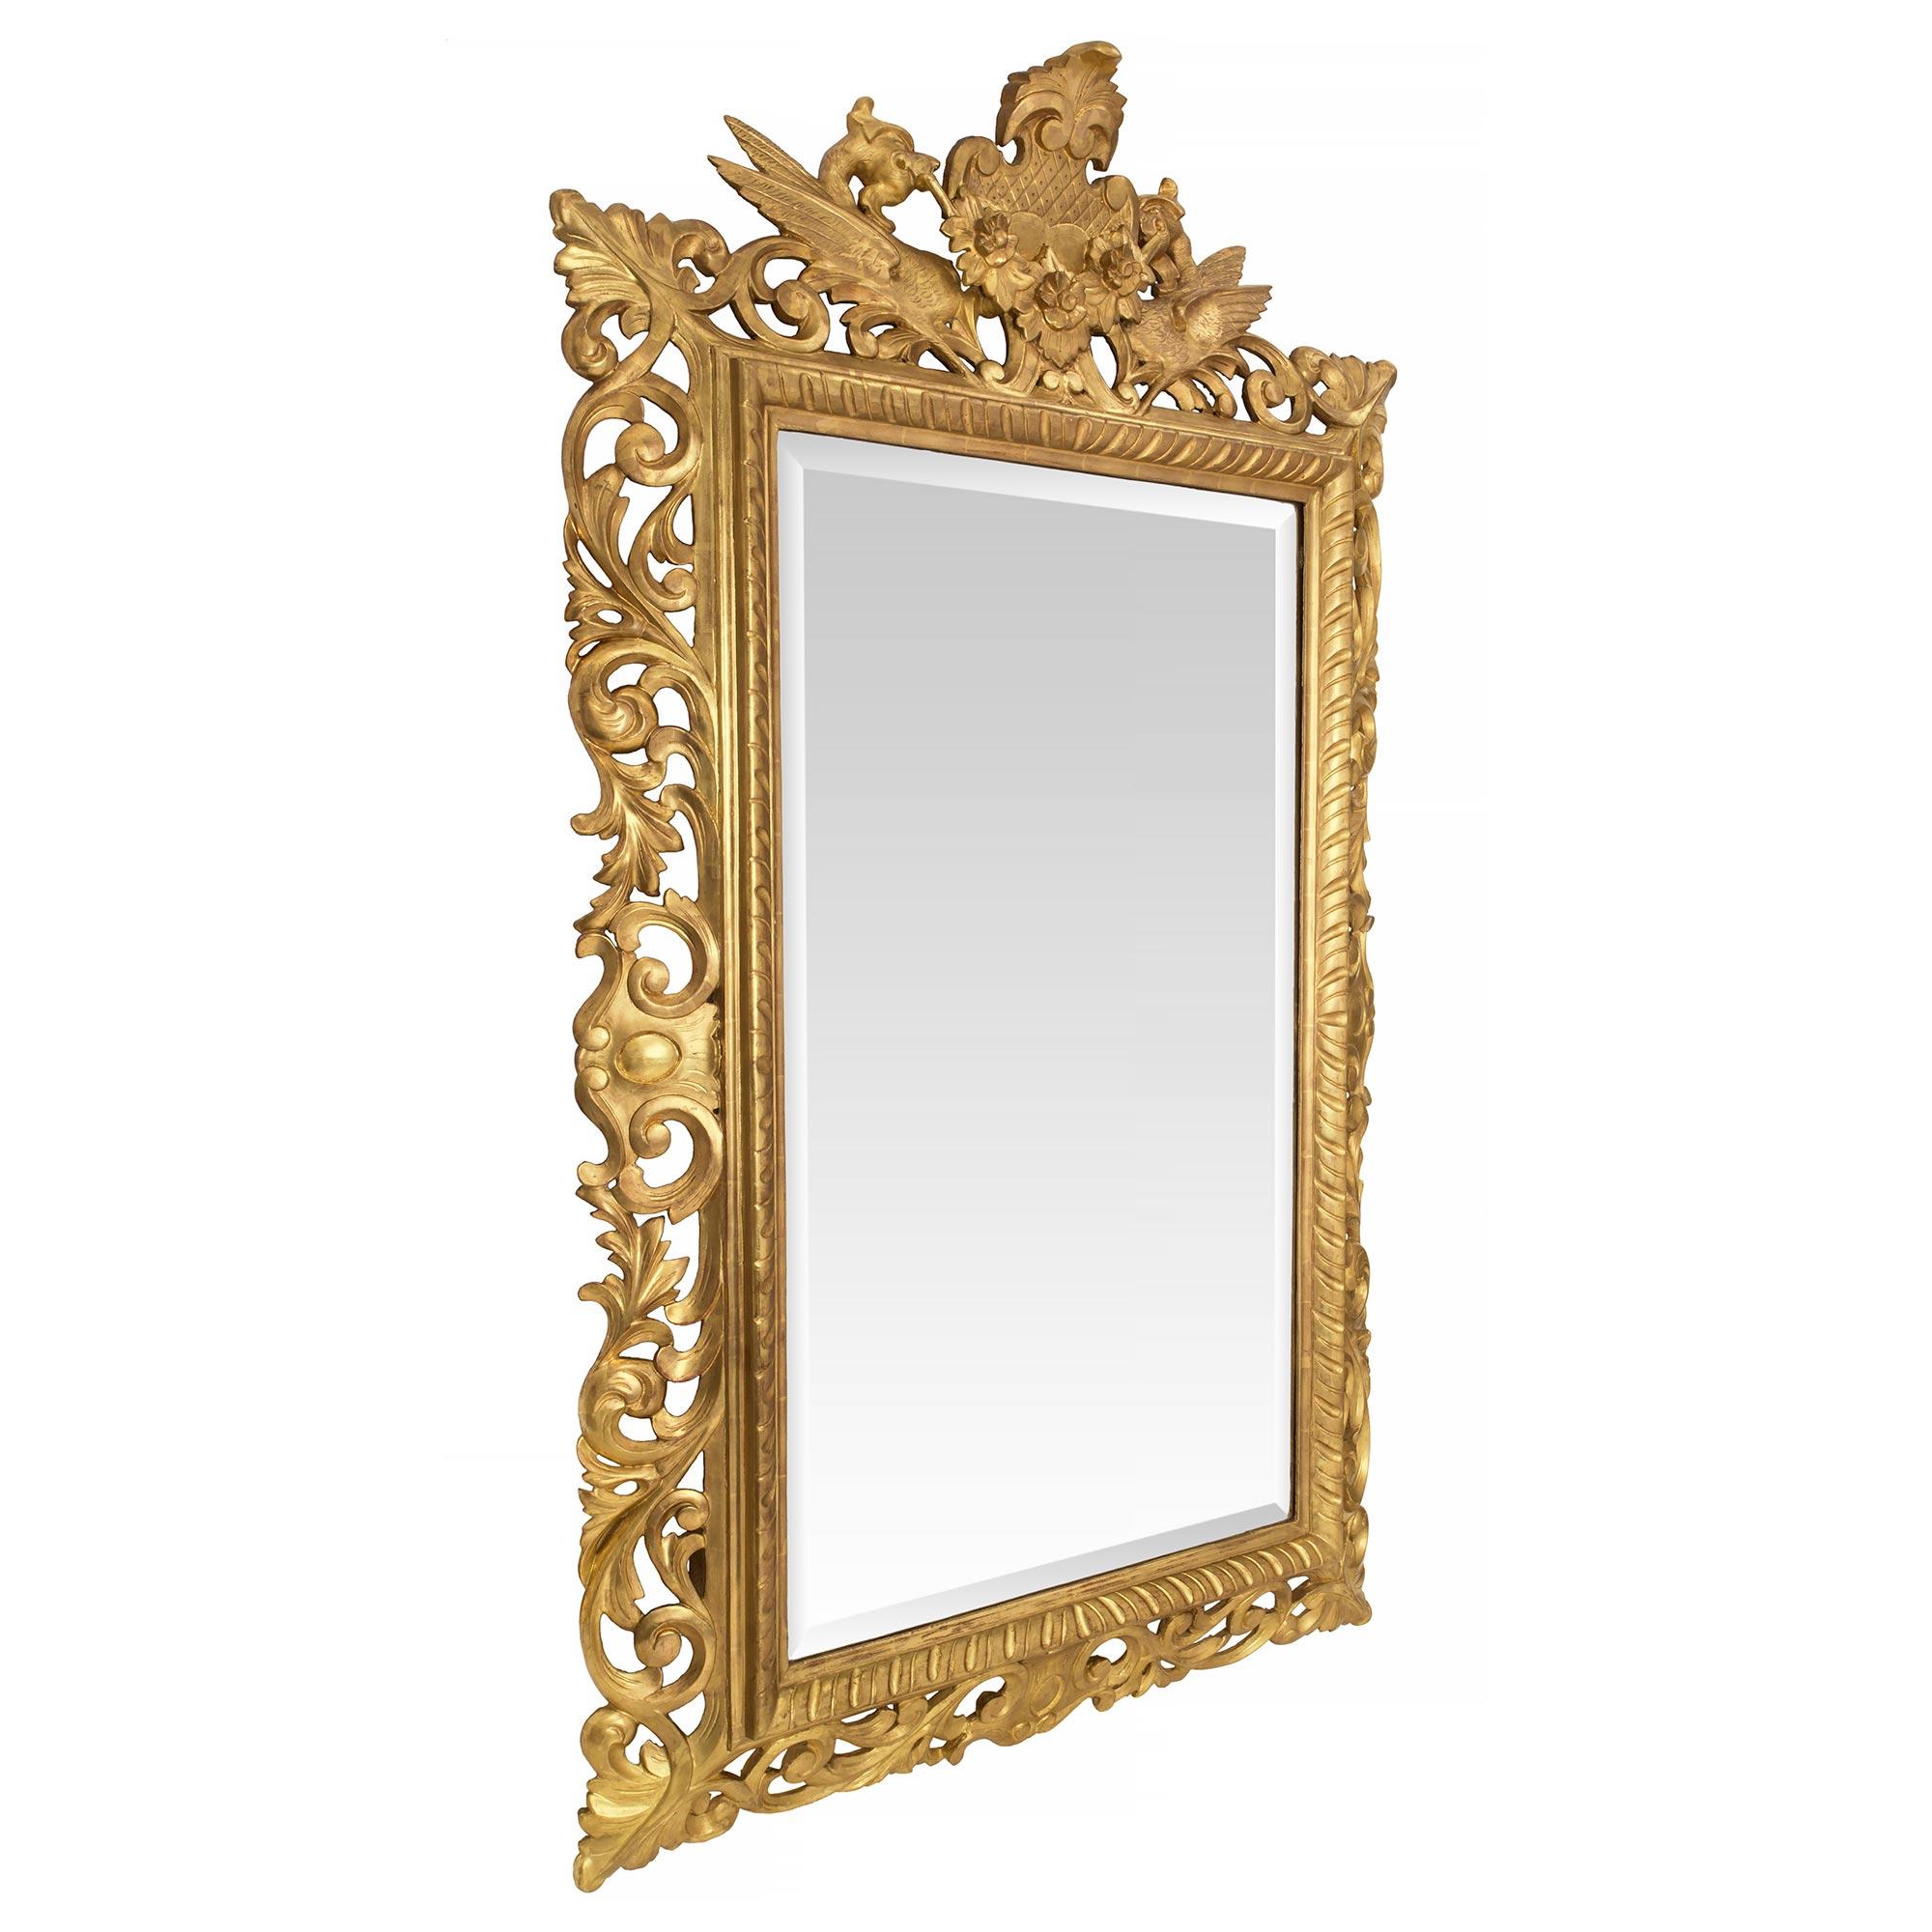 An outstanding Italian 19th century Baroque st. giltwood mirror. The original beveled mirror plate is framed within a most decorative fluted pattern. Extending along the base and up each side are richly carved intricate pierced scrolled movements